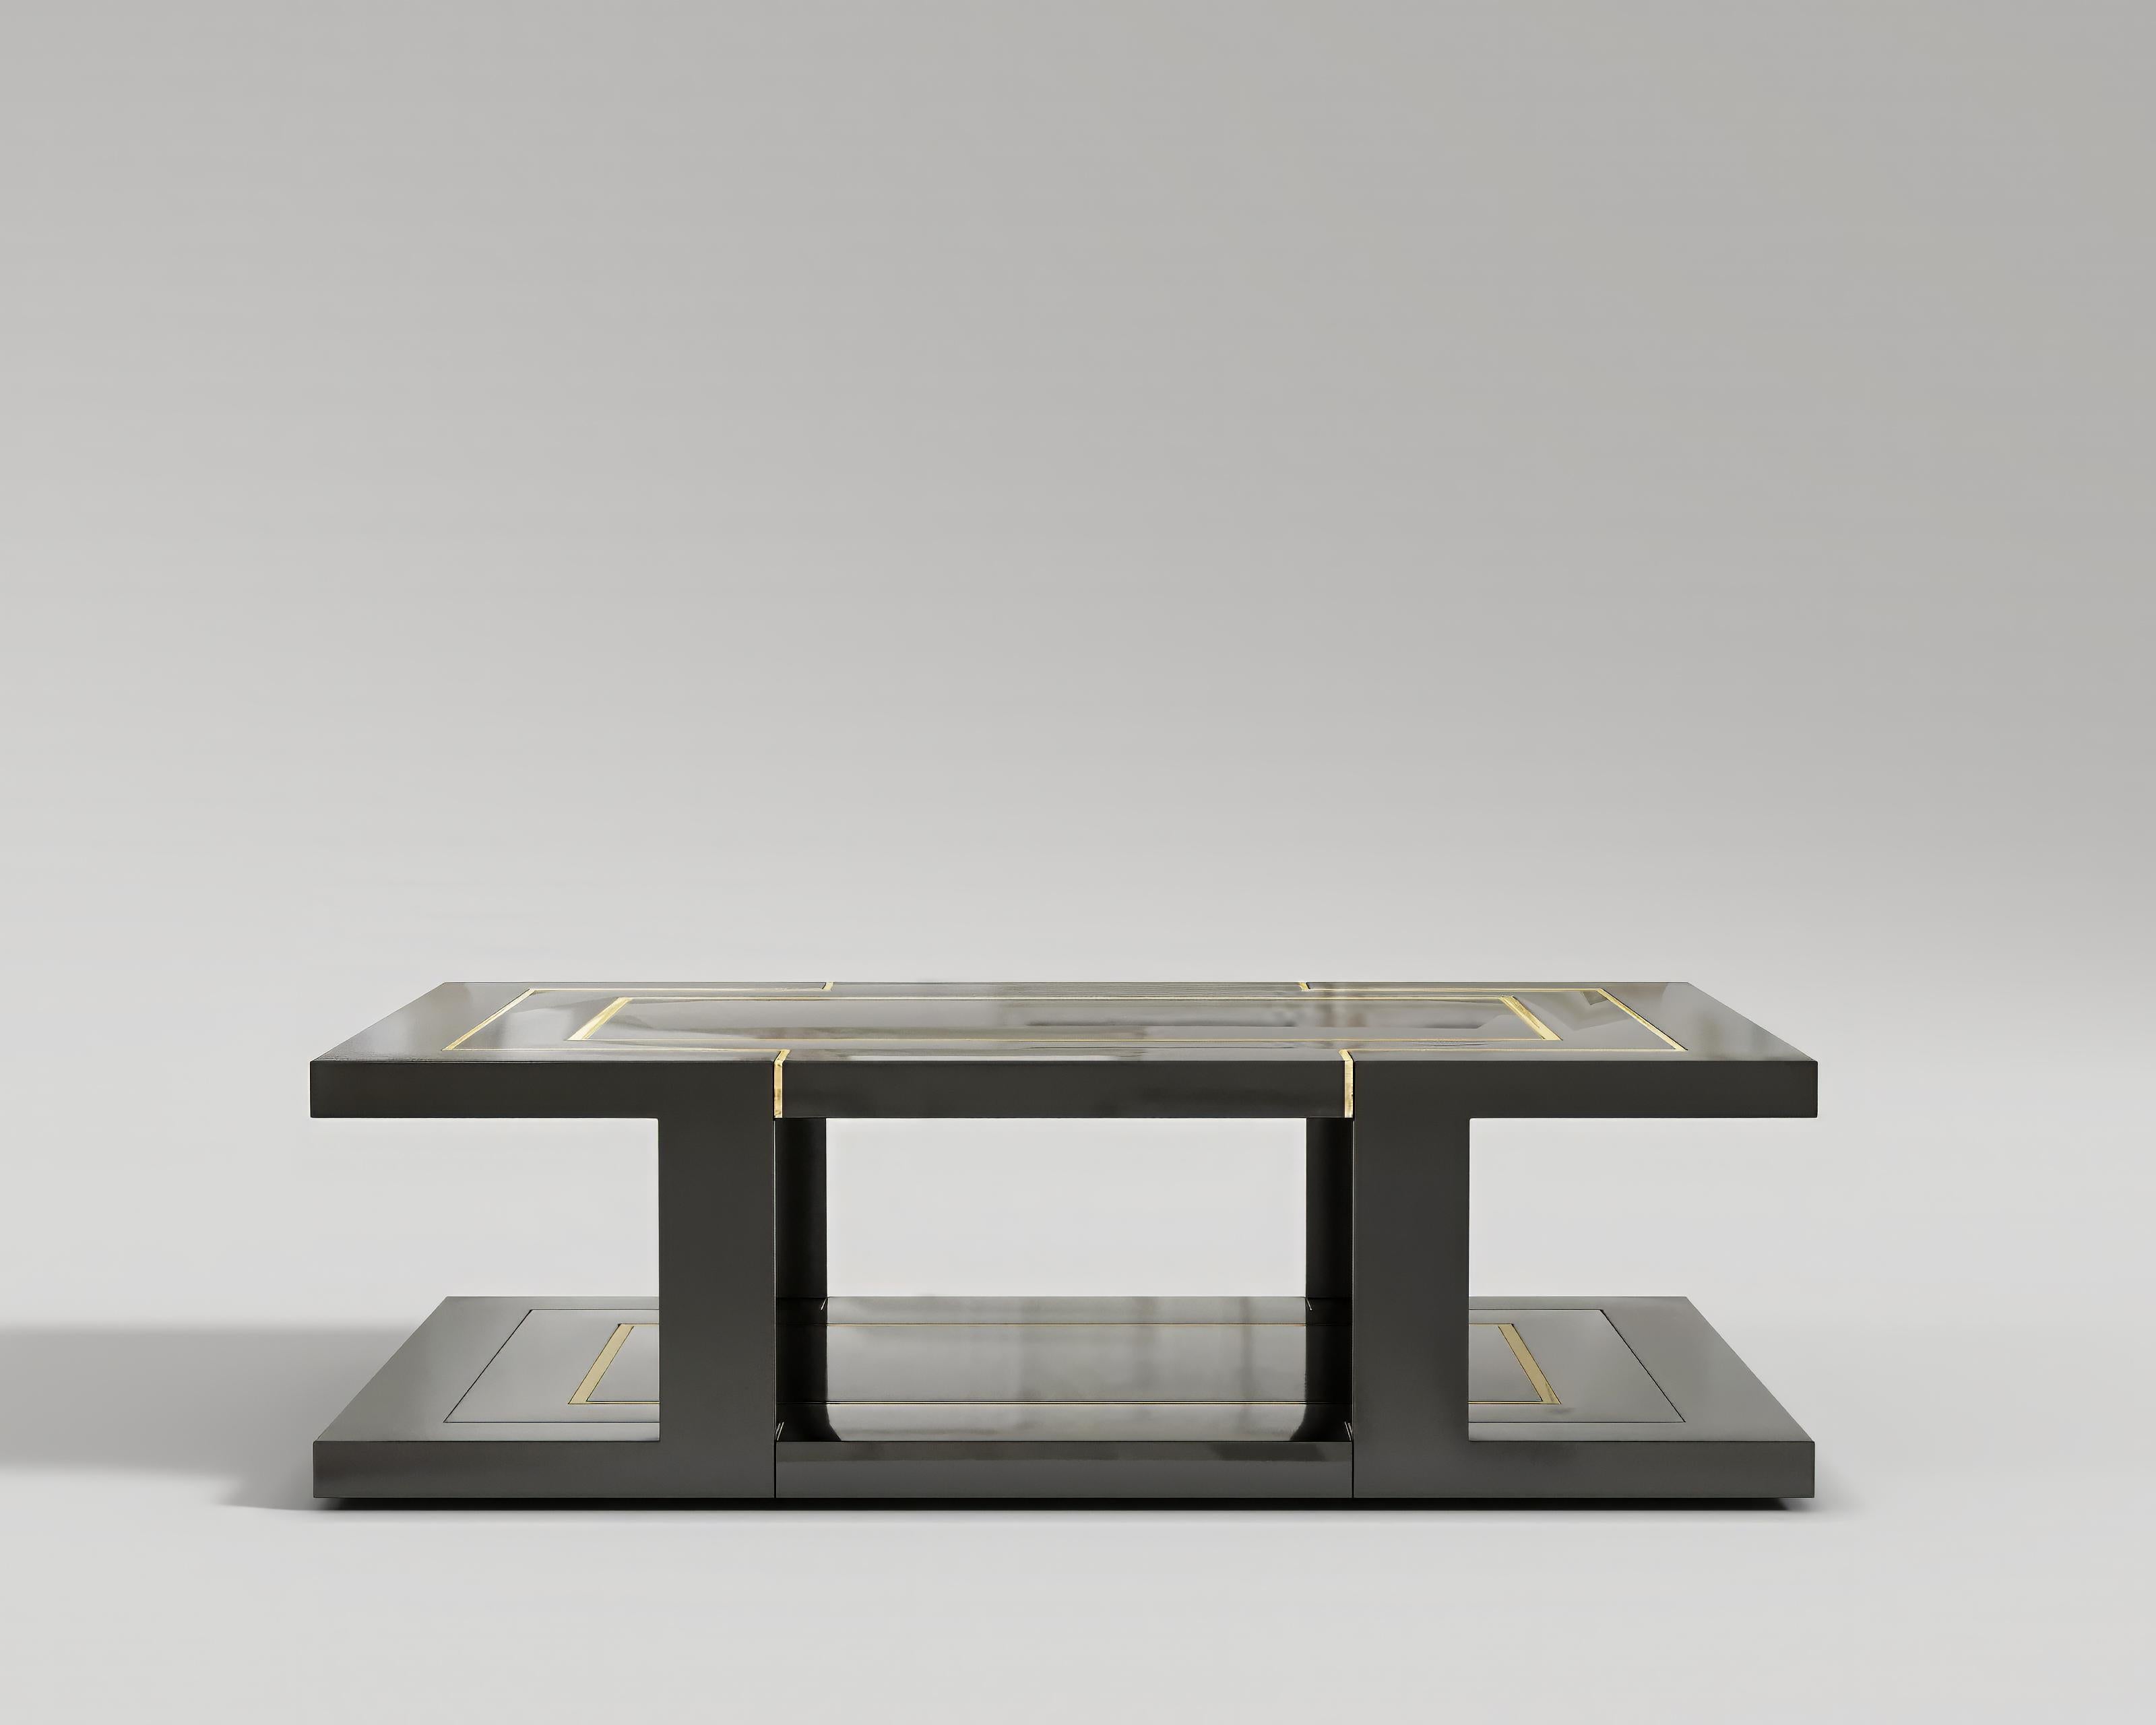 Deco Coffee Table
The Deco Coffee Table is a masterpiece of elegance and sophistication, designed to elevate the aesthetics of any living space. Crafted with the utmost attention to detail and using the finest materials, this coffee table combines